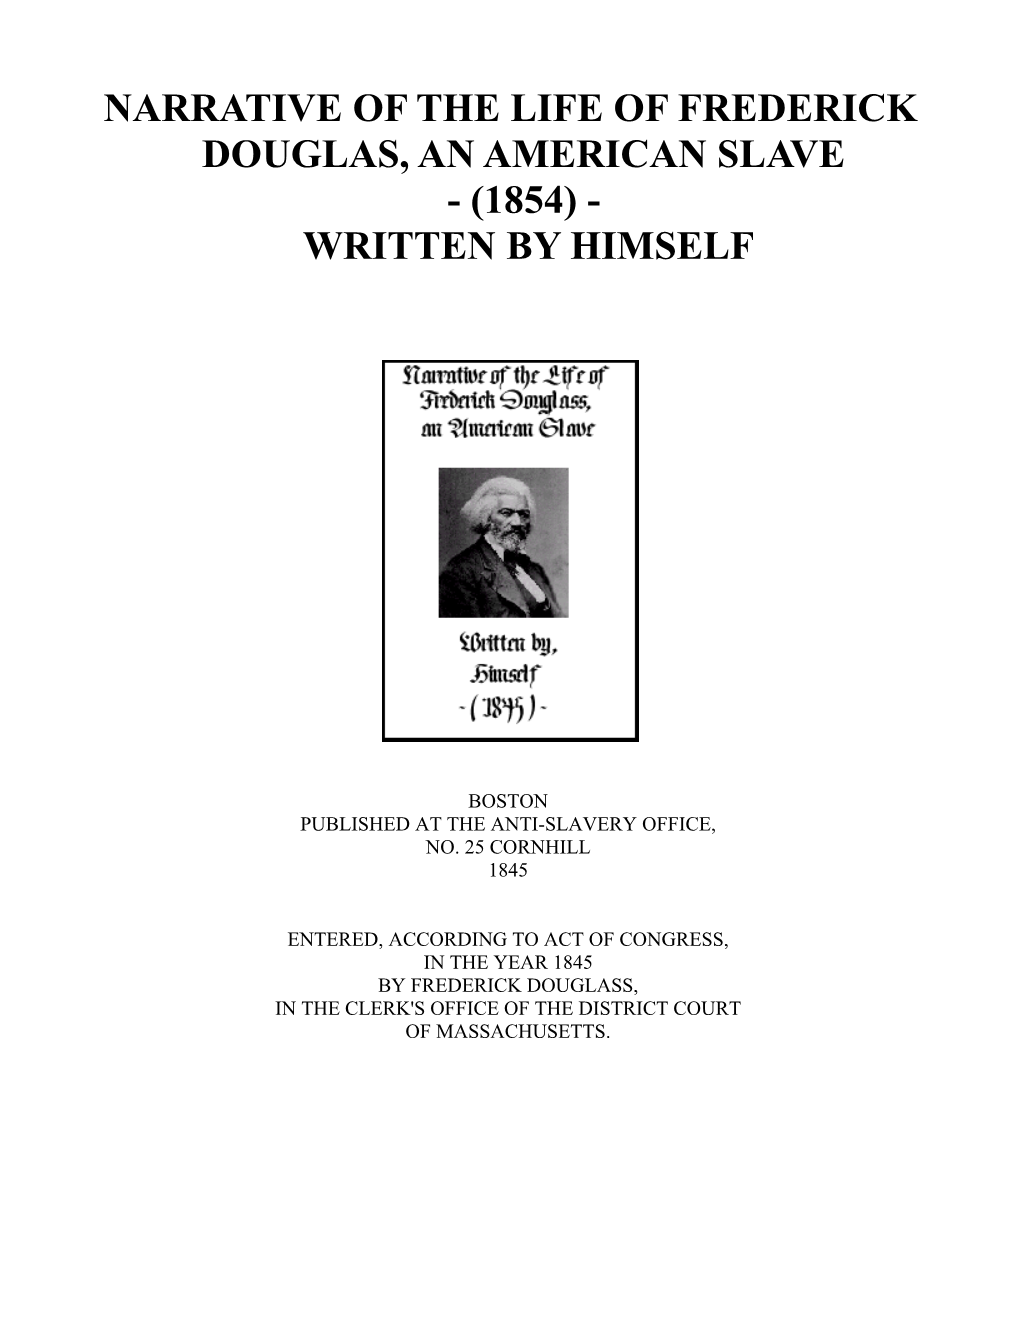 Narrative of the Life of Frederick Douglas, an American Slave